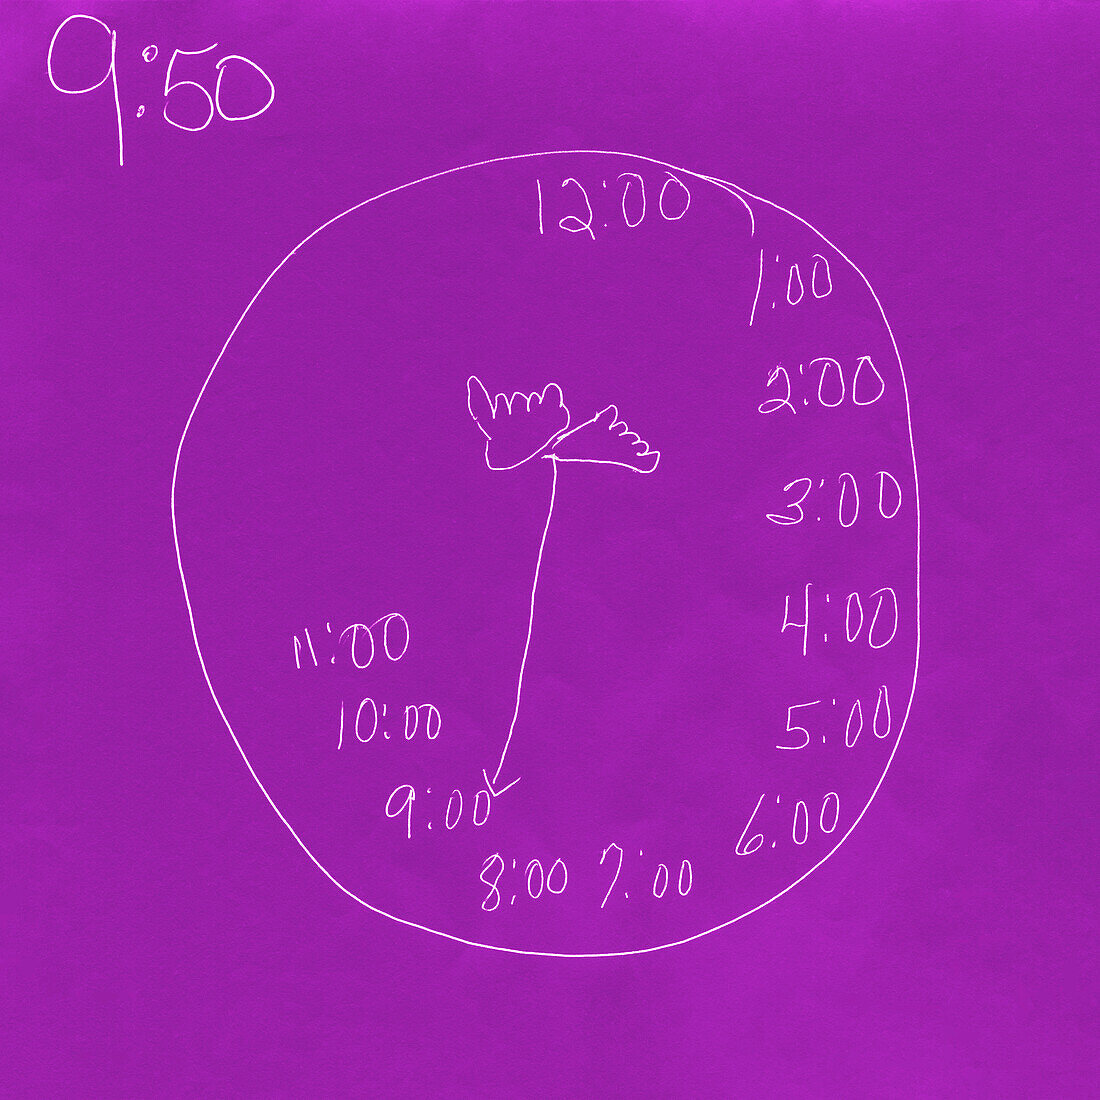 Clock drawn by a patient with Alzheimer's disease